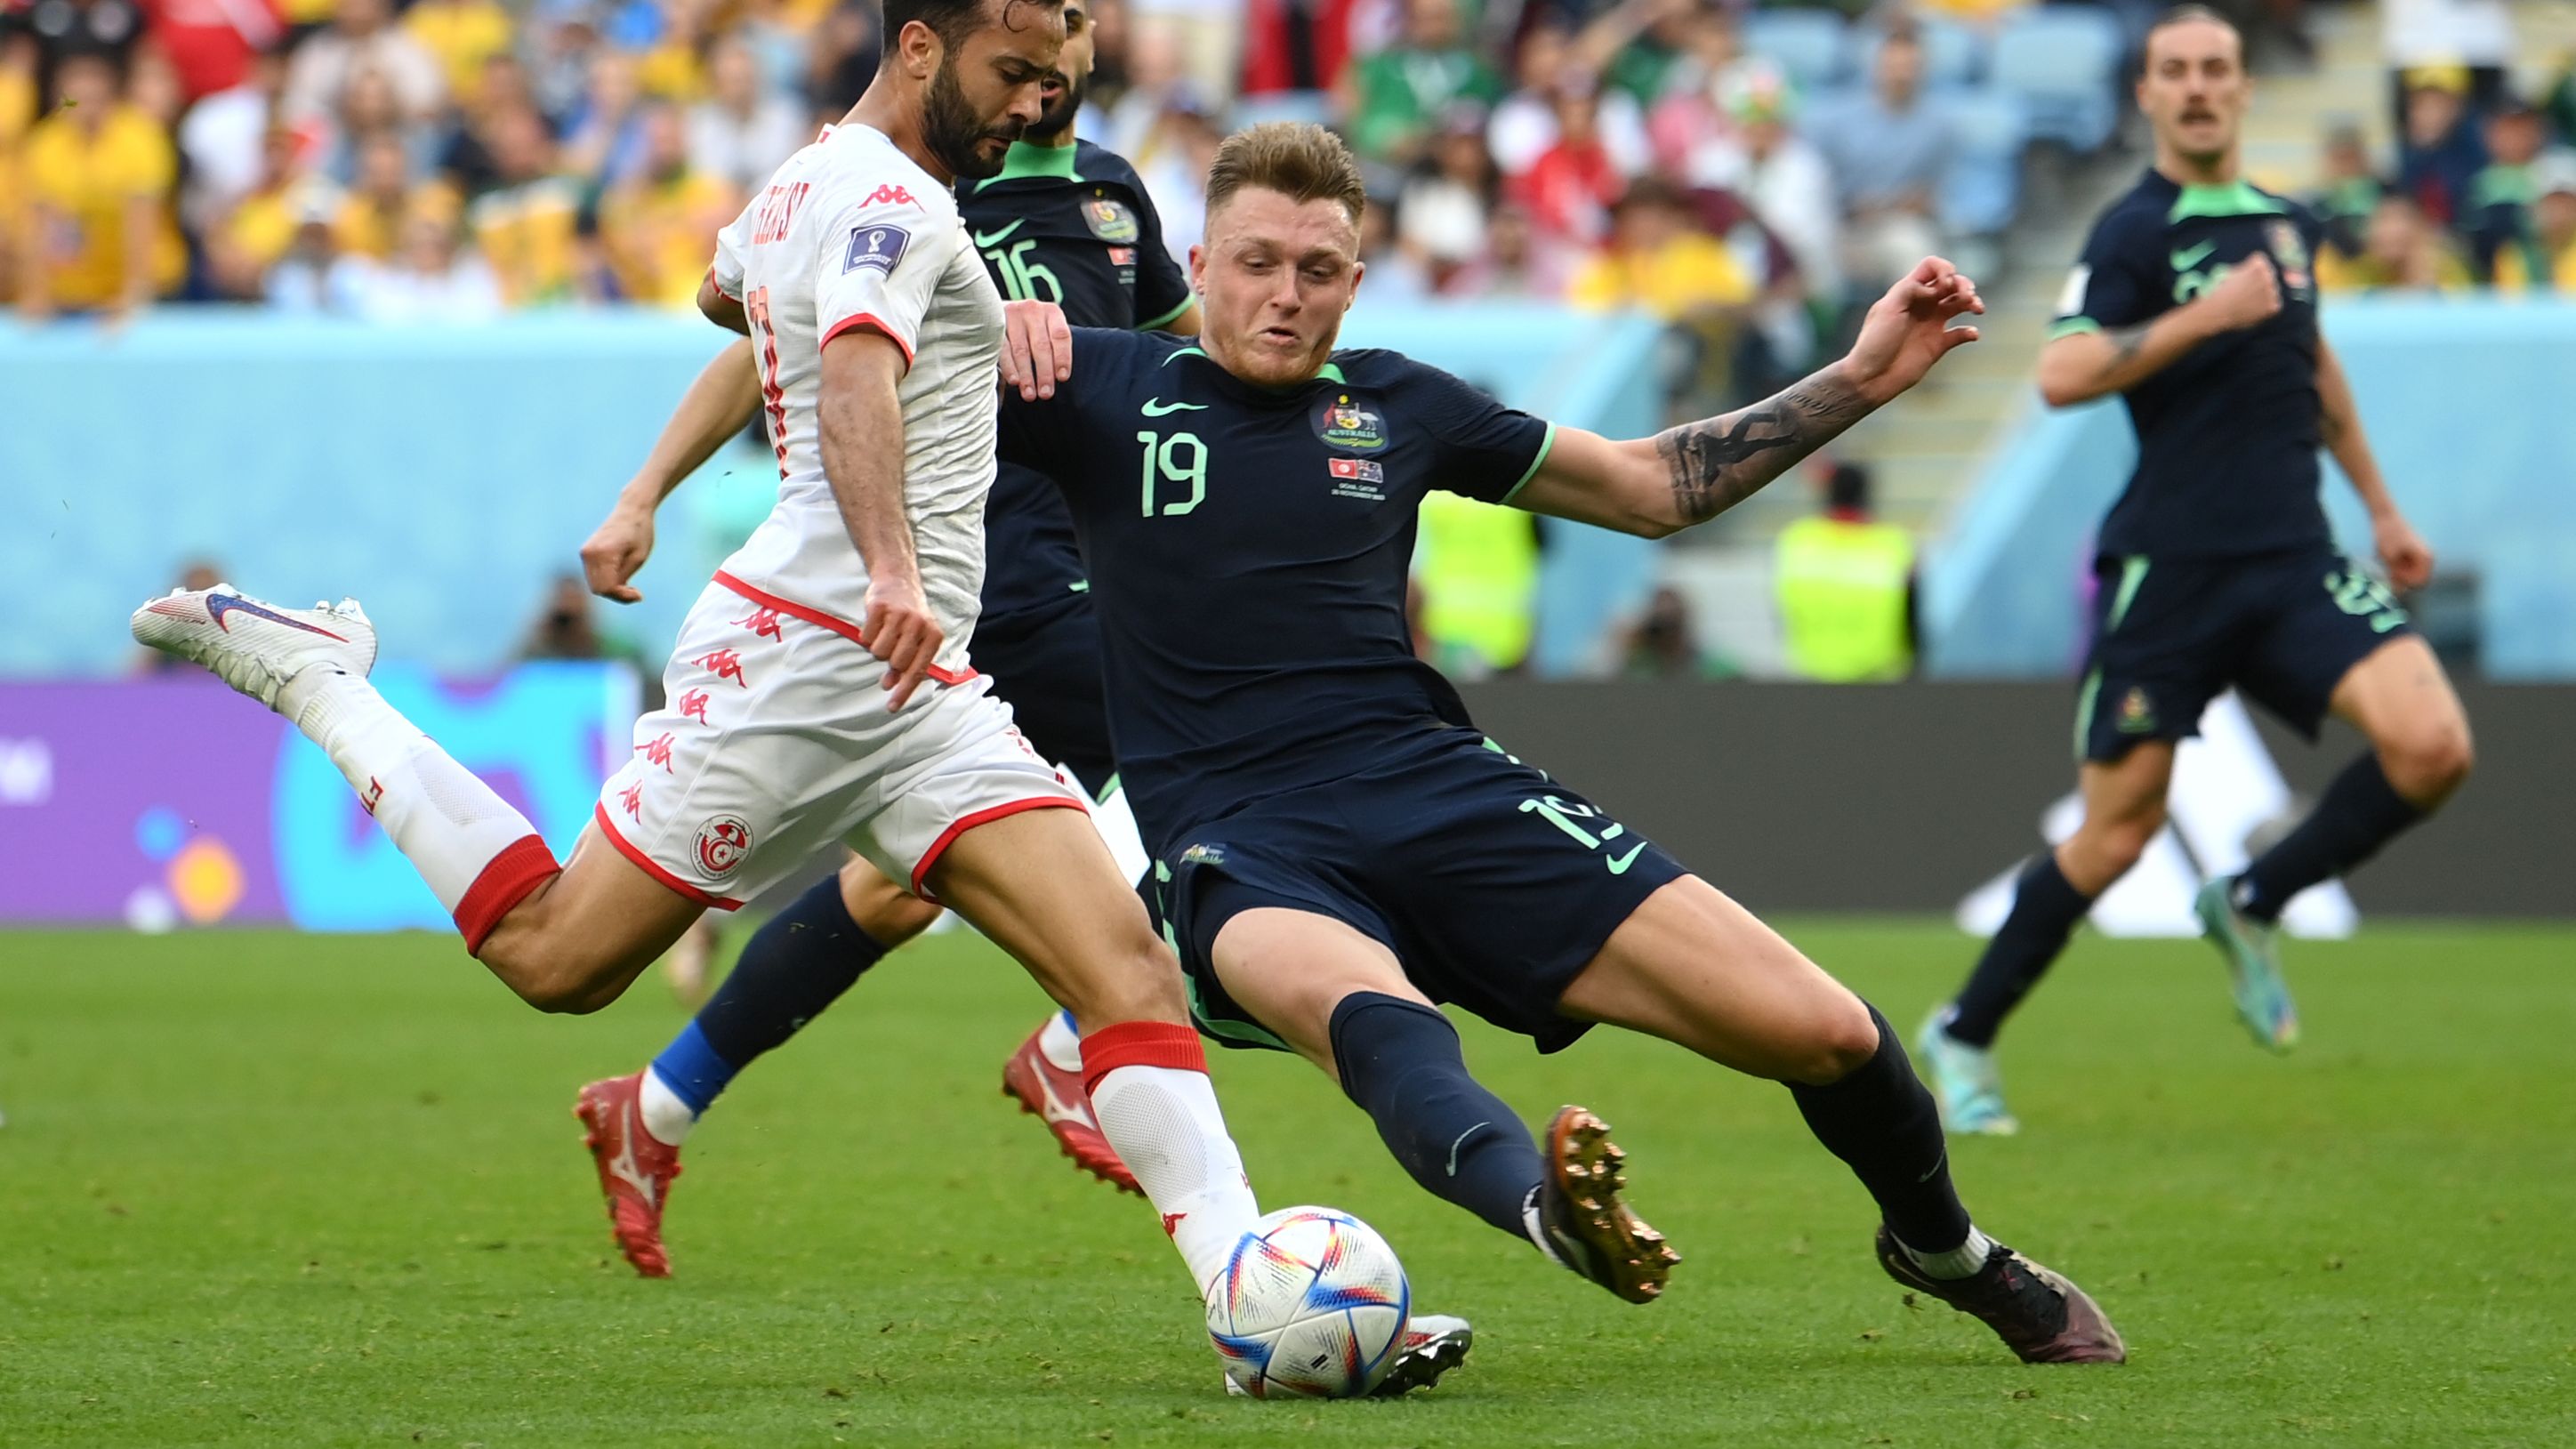 Harry Souttar&#x27;s tackle in the dying moments of their match against Tunisia helped Australia claim their first FIFA World Cup win since 2010.